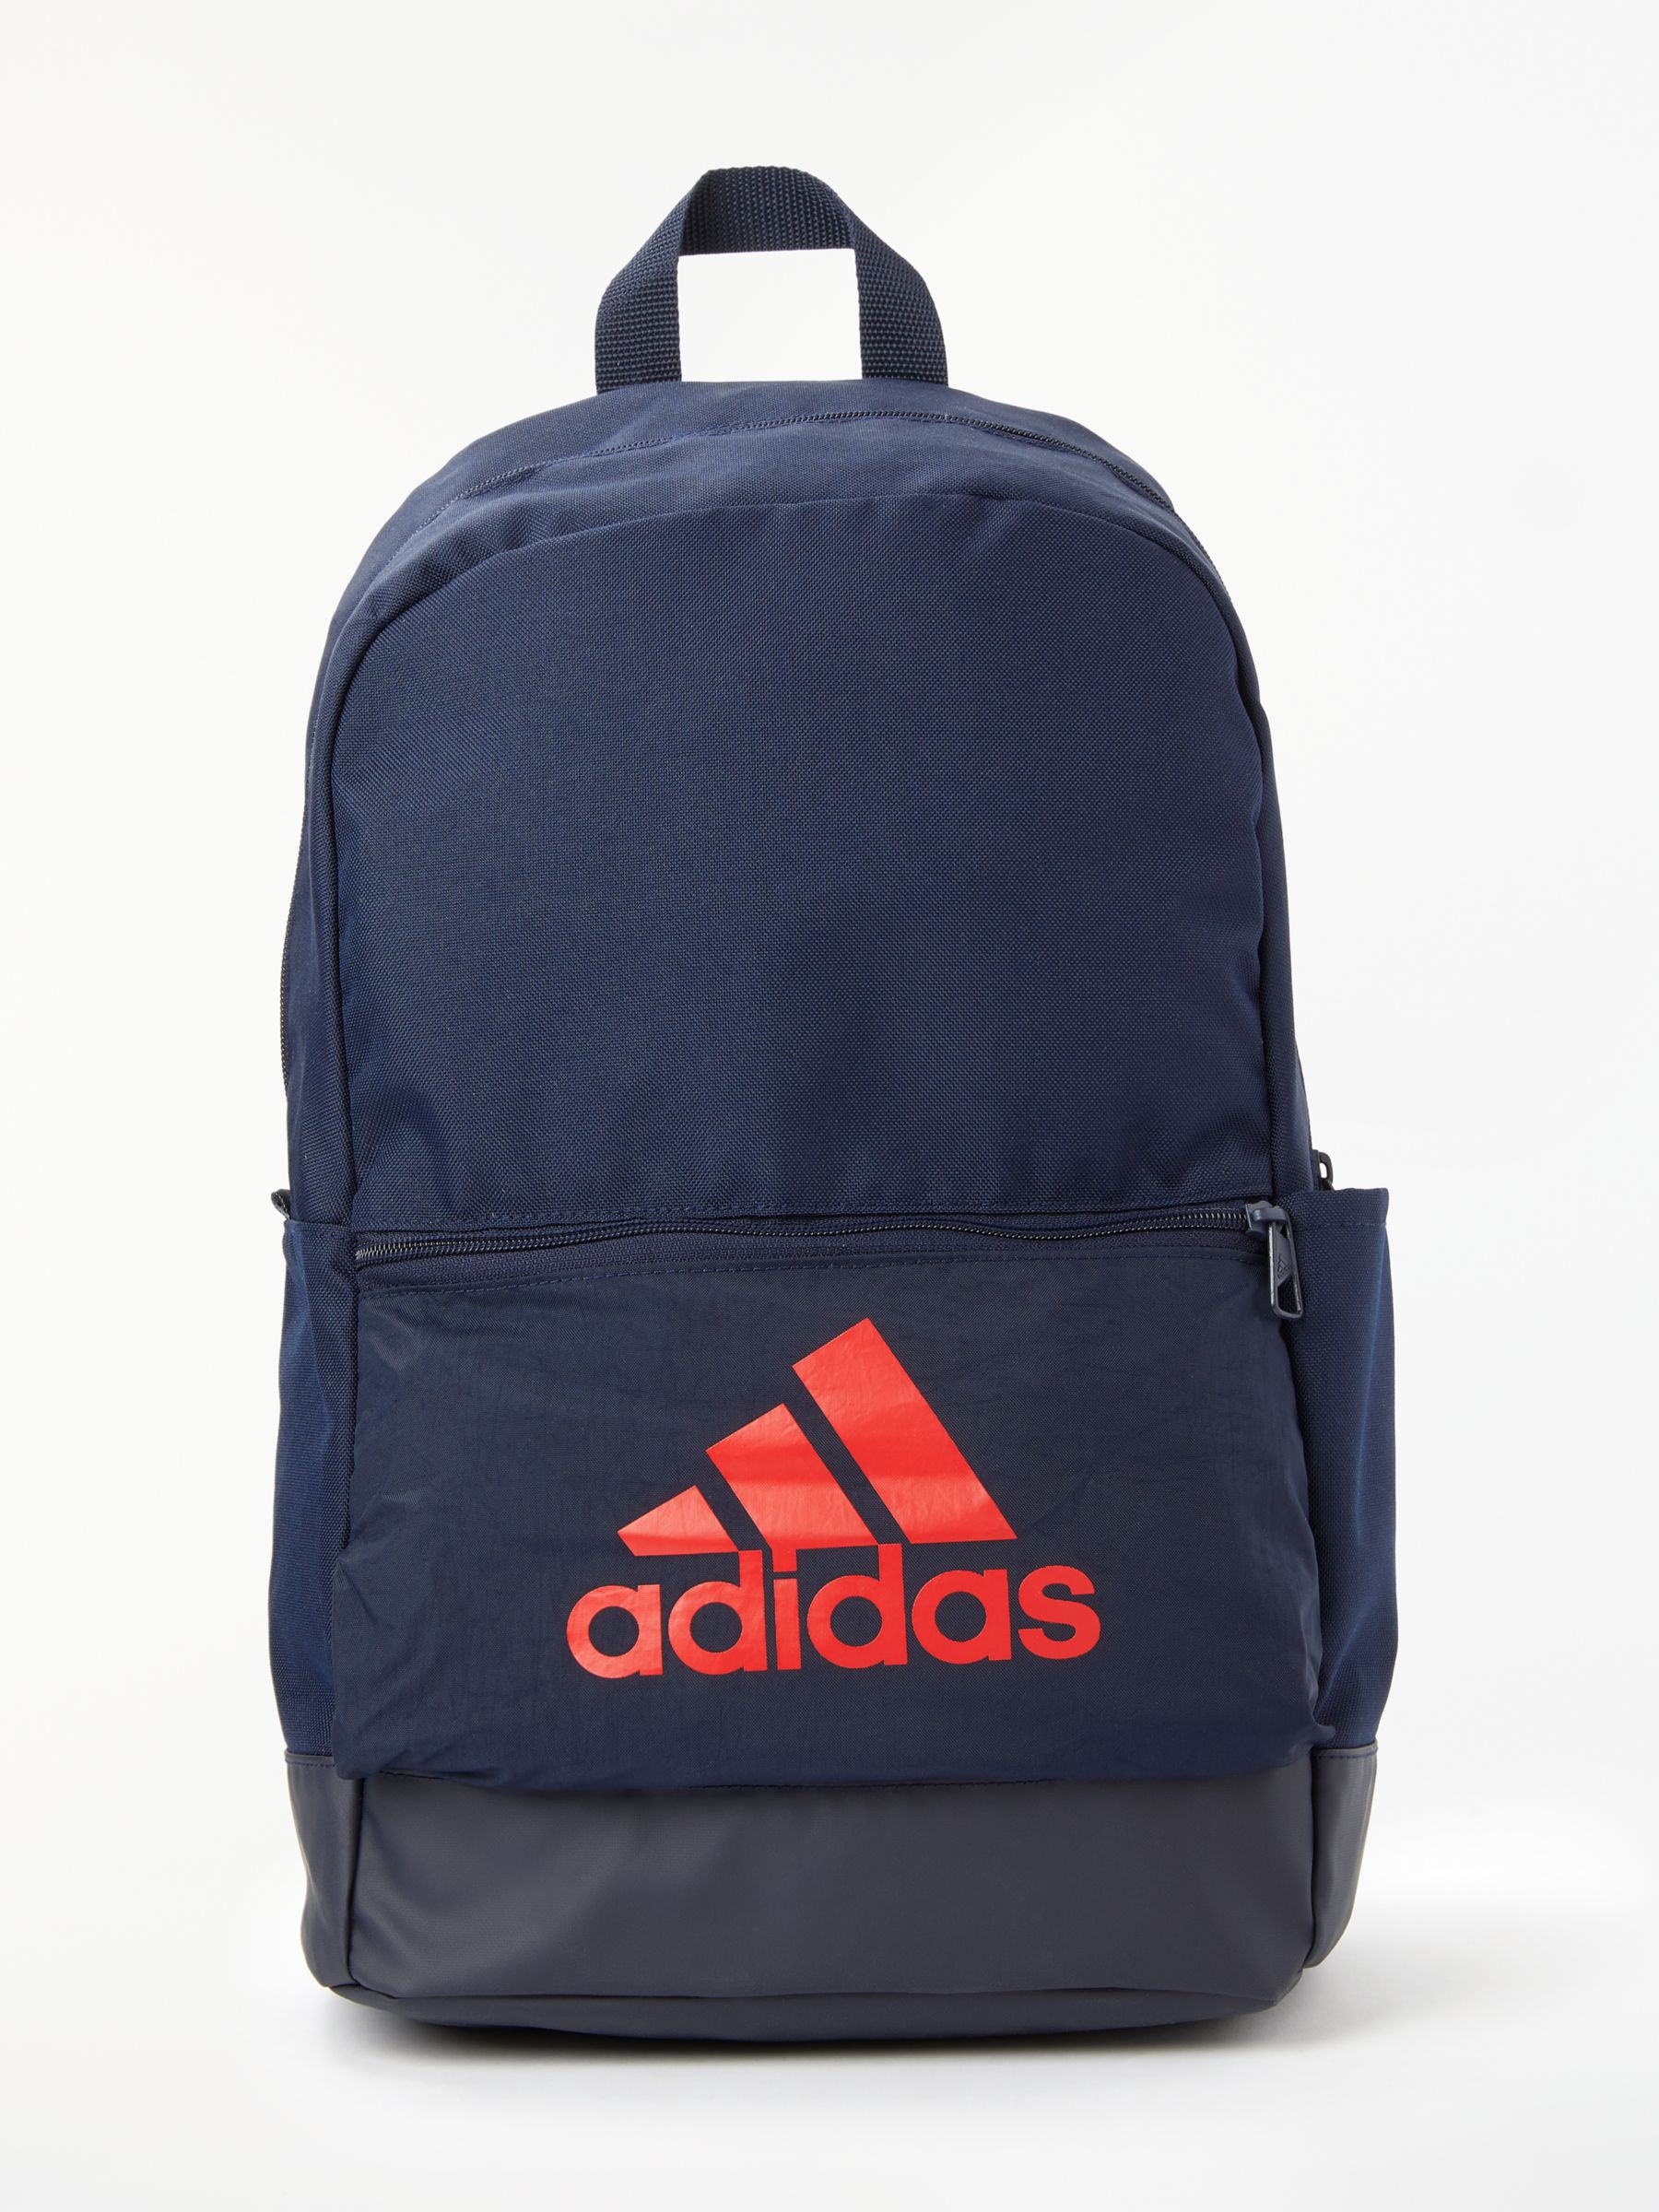 adidas Classic Badge of Sport Backpack, Legend Ink/Active Red